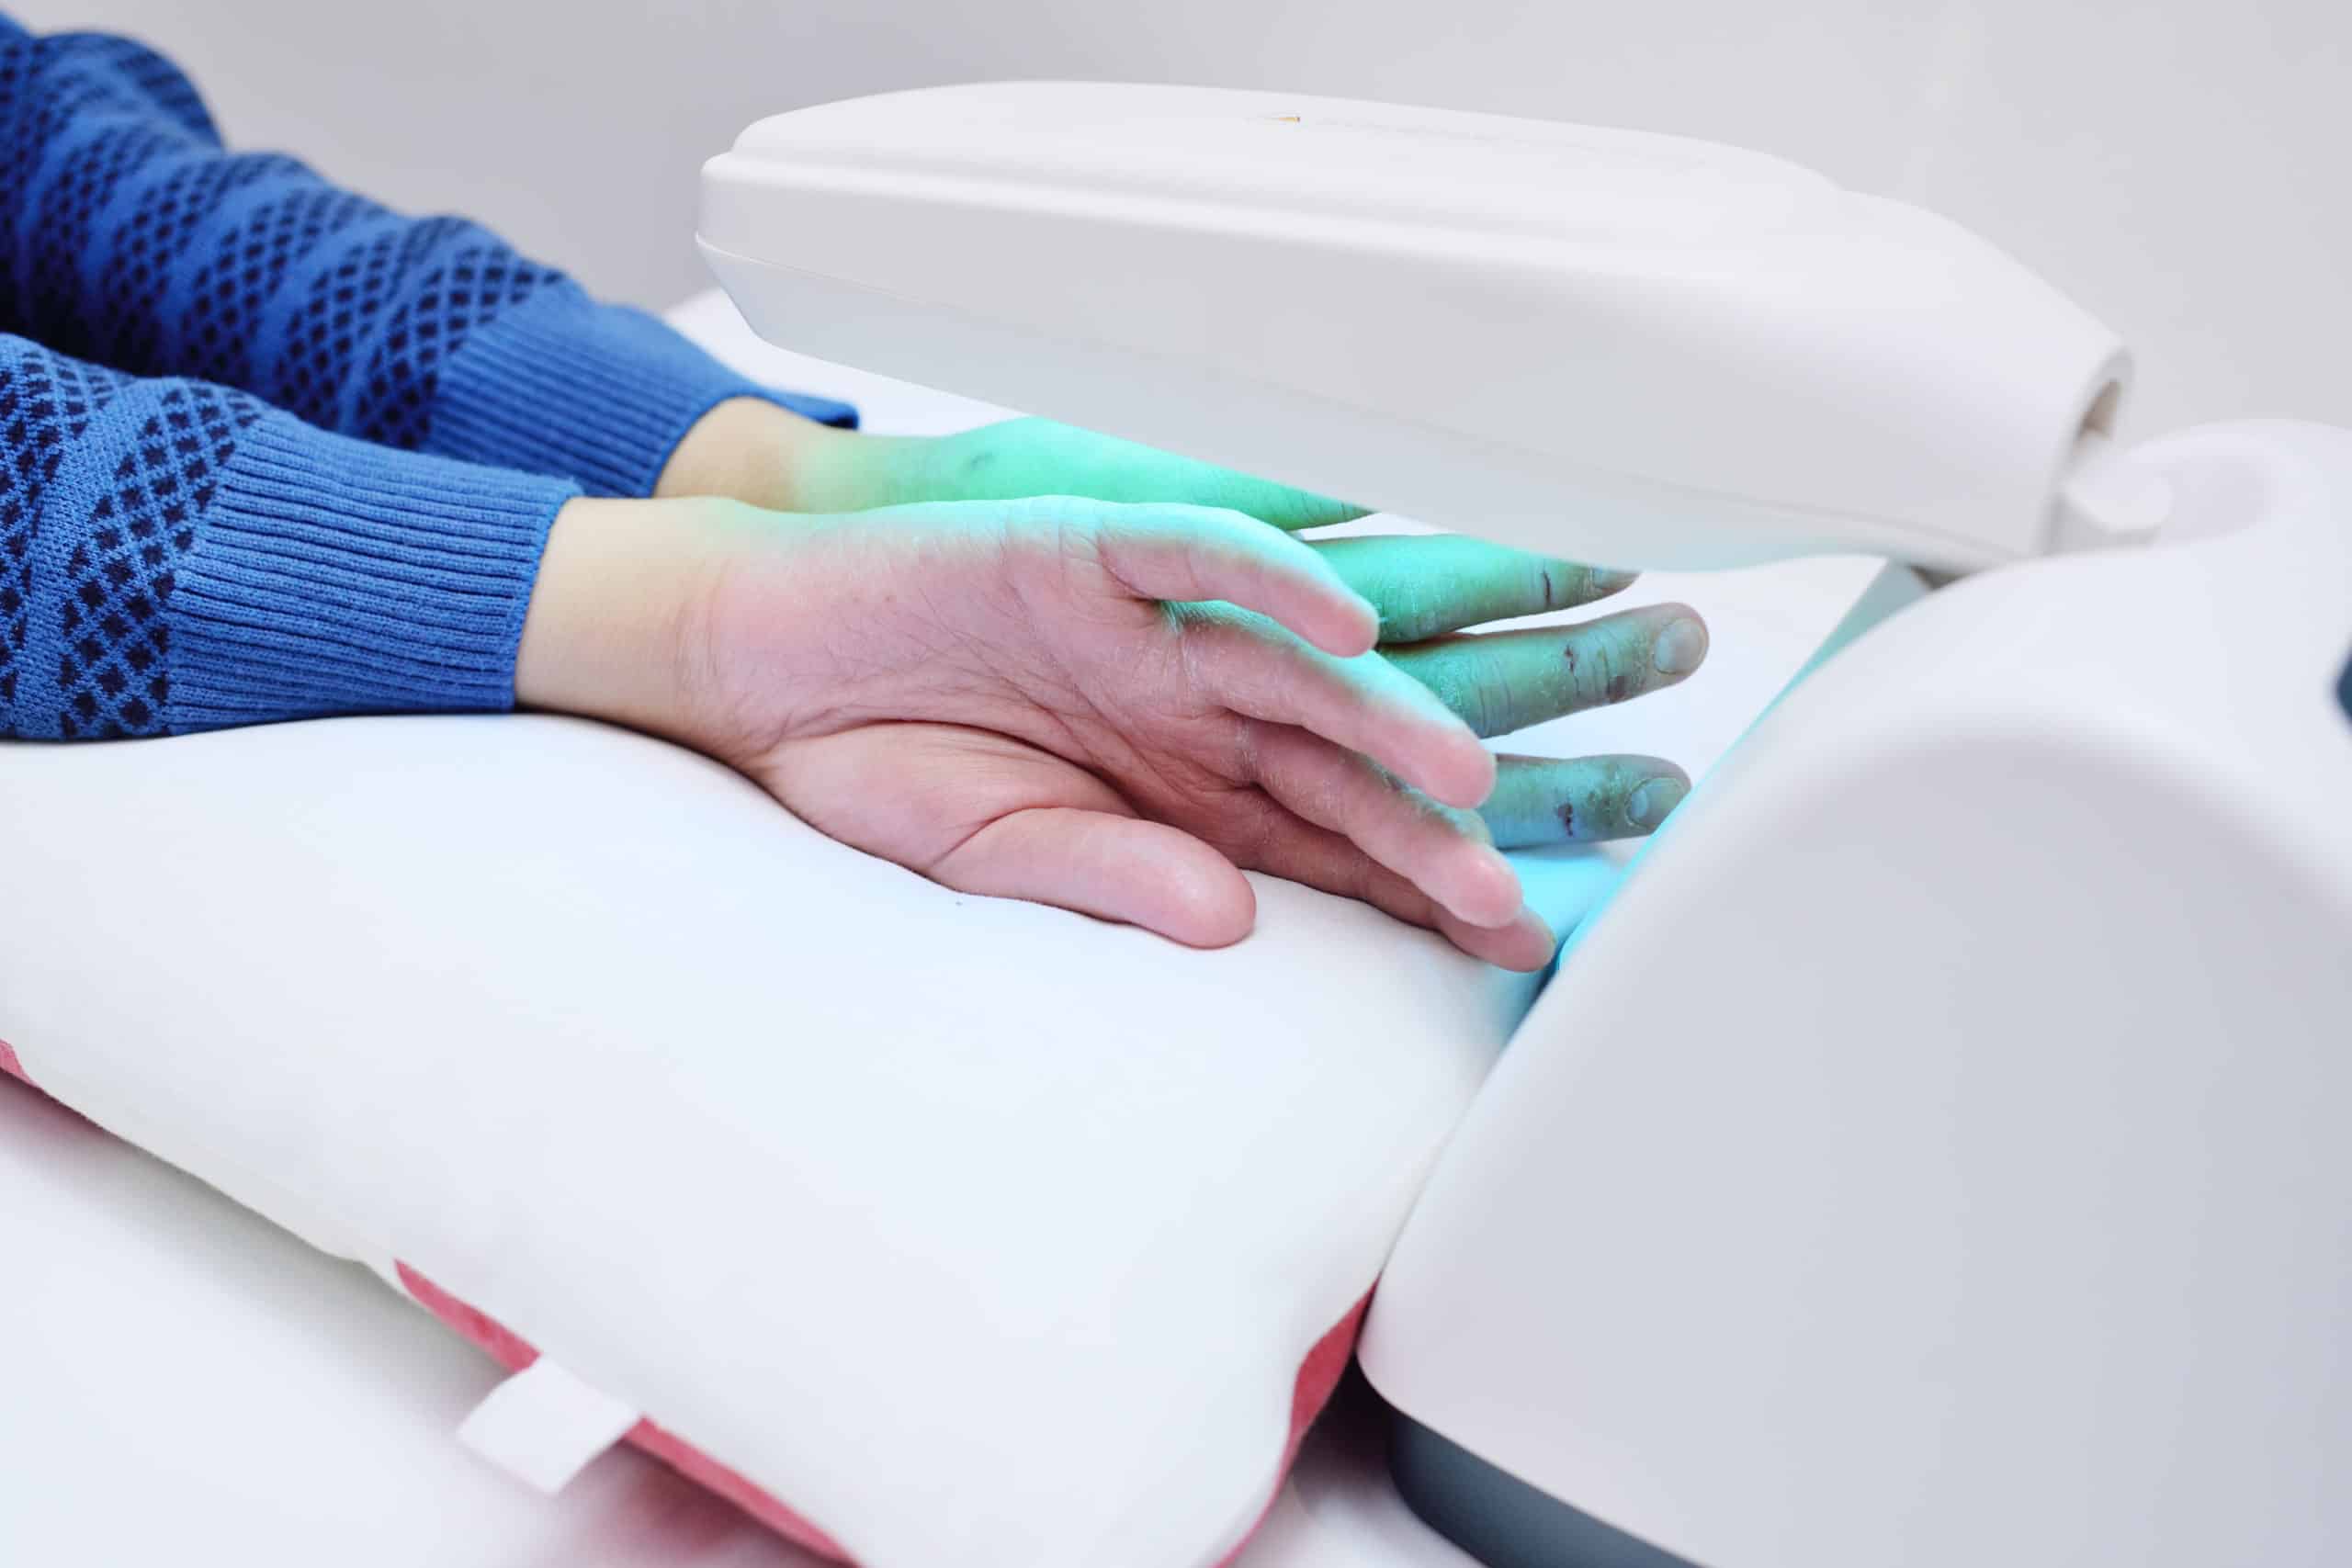 hands of a patient with psoriasis close-up under an ultraviolet lamp. Light therapy, phototherapy